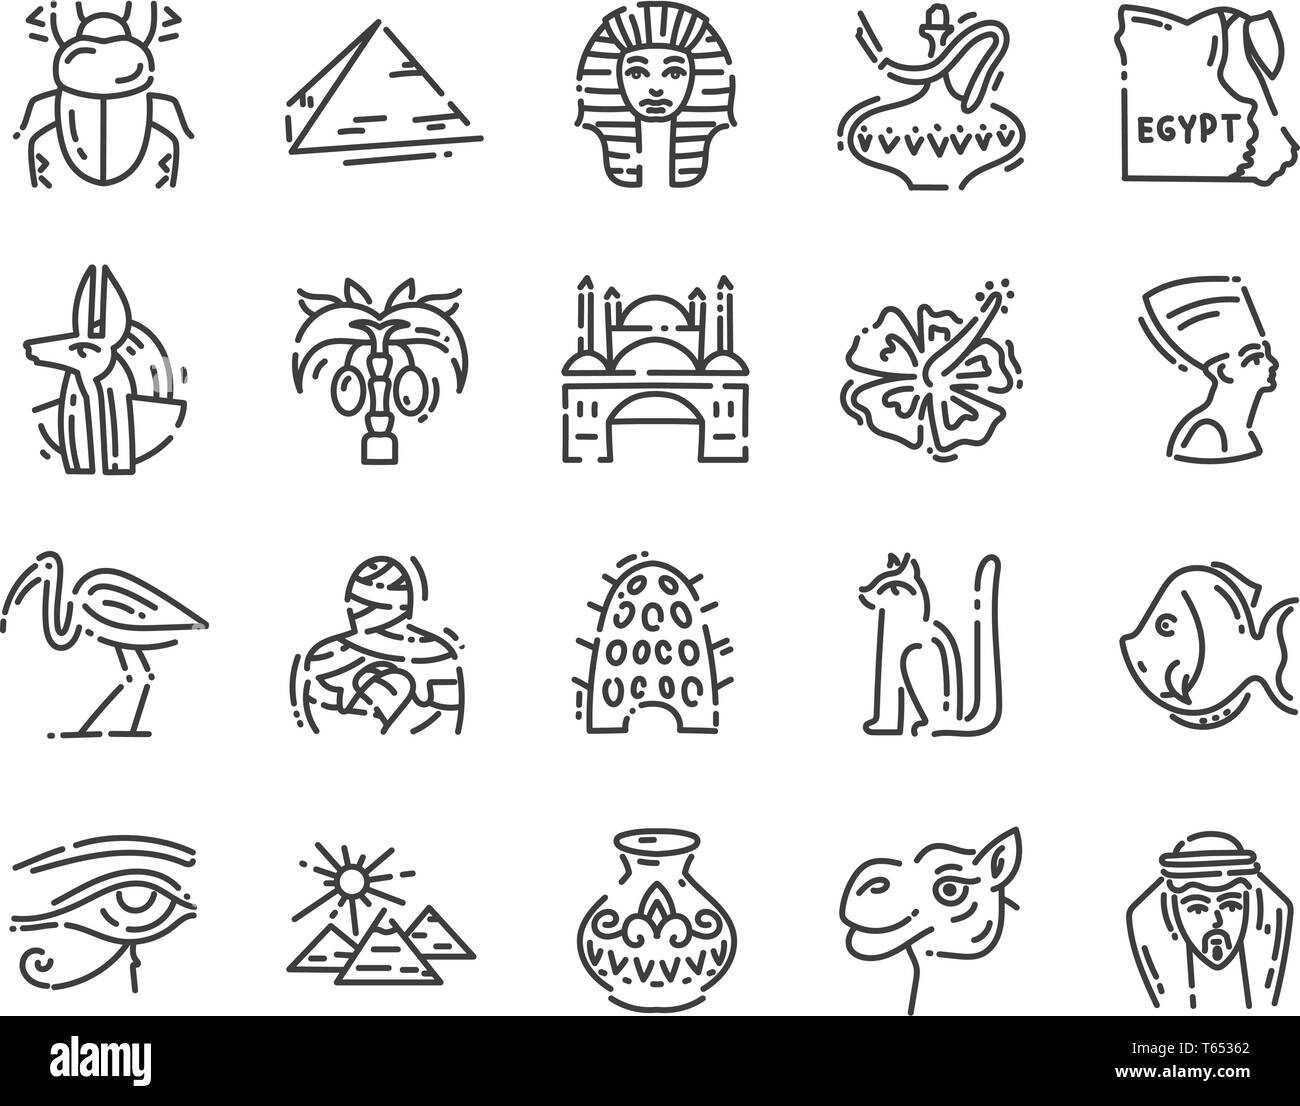 set of 20 flat icons of Egypt culture, design elements isolated on white for web site Stock Vector